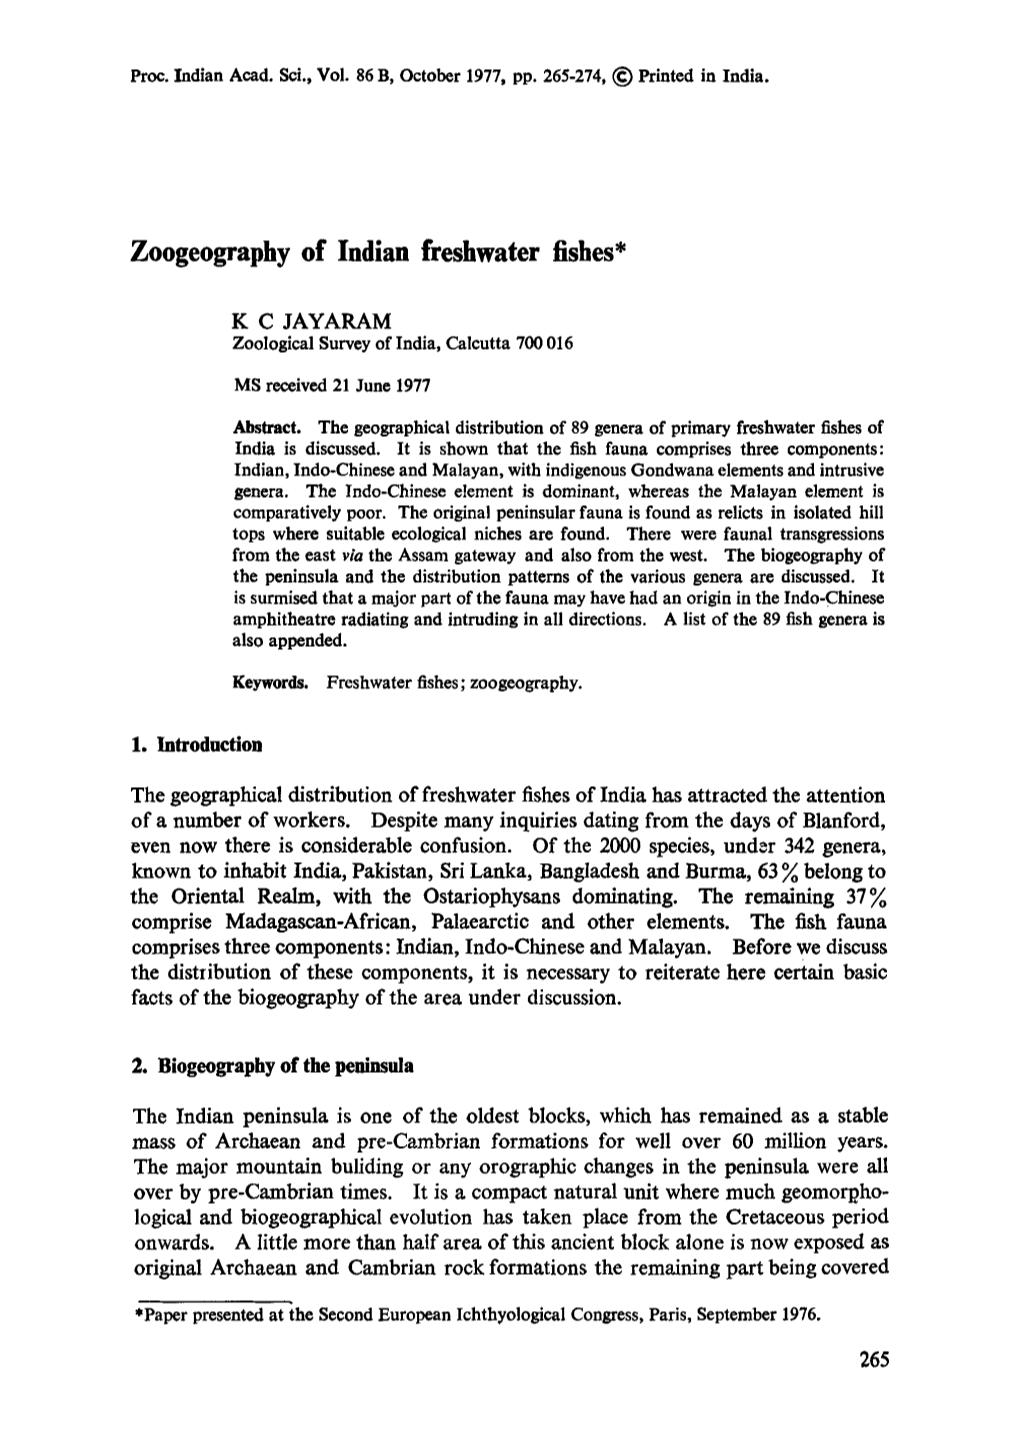 Zoogeography of Indian Freshwater Fishes*